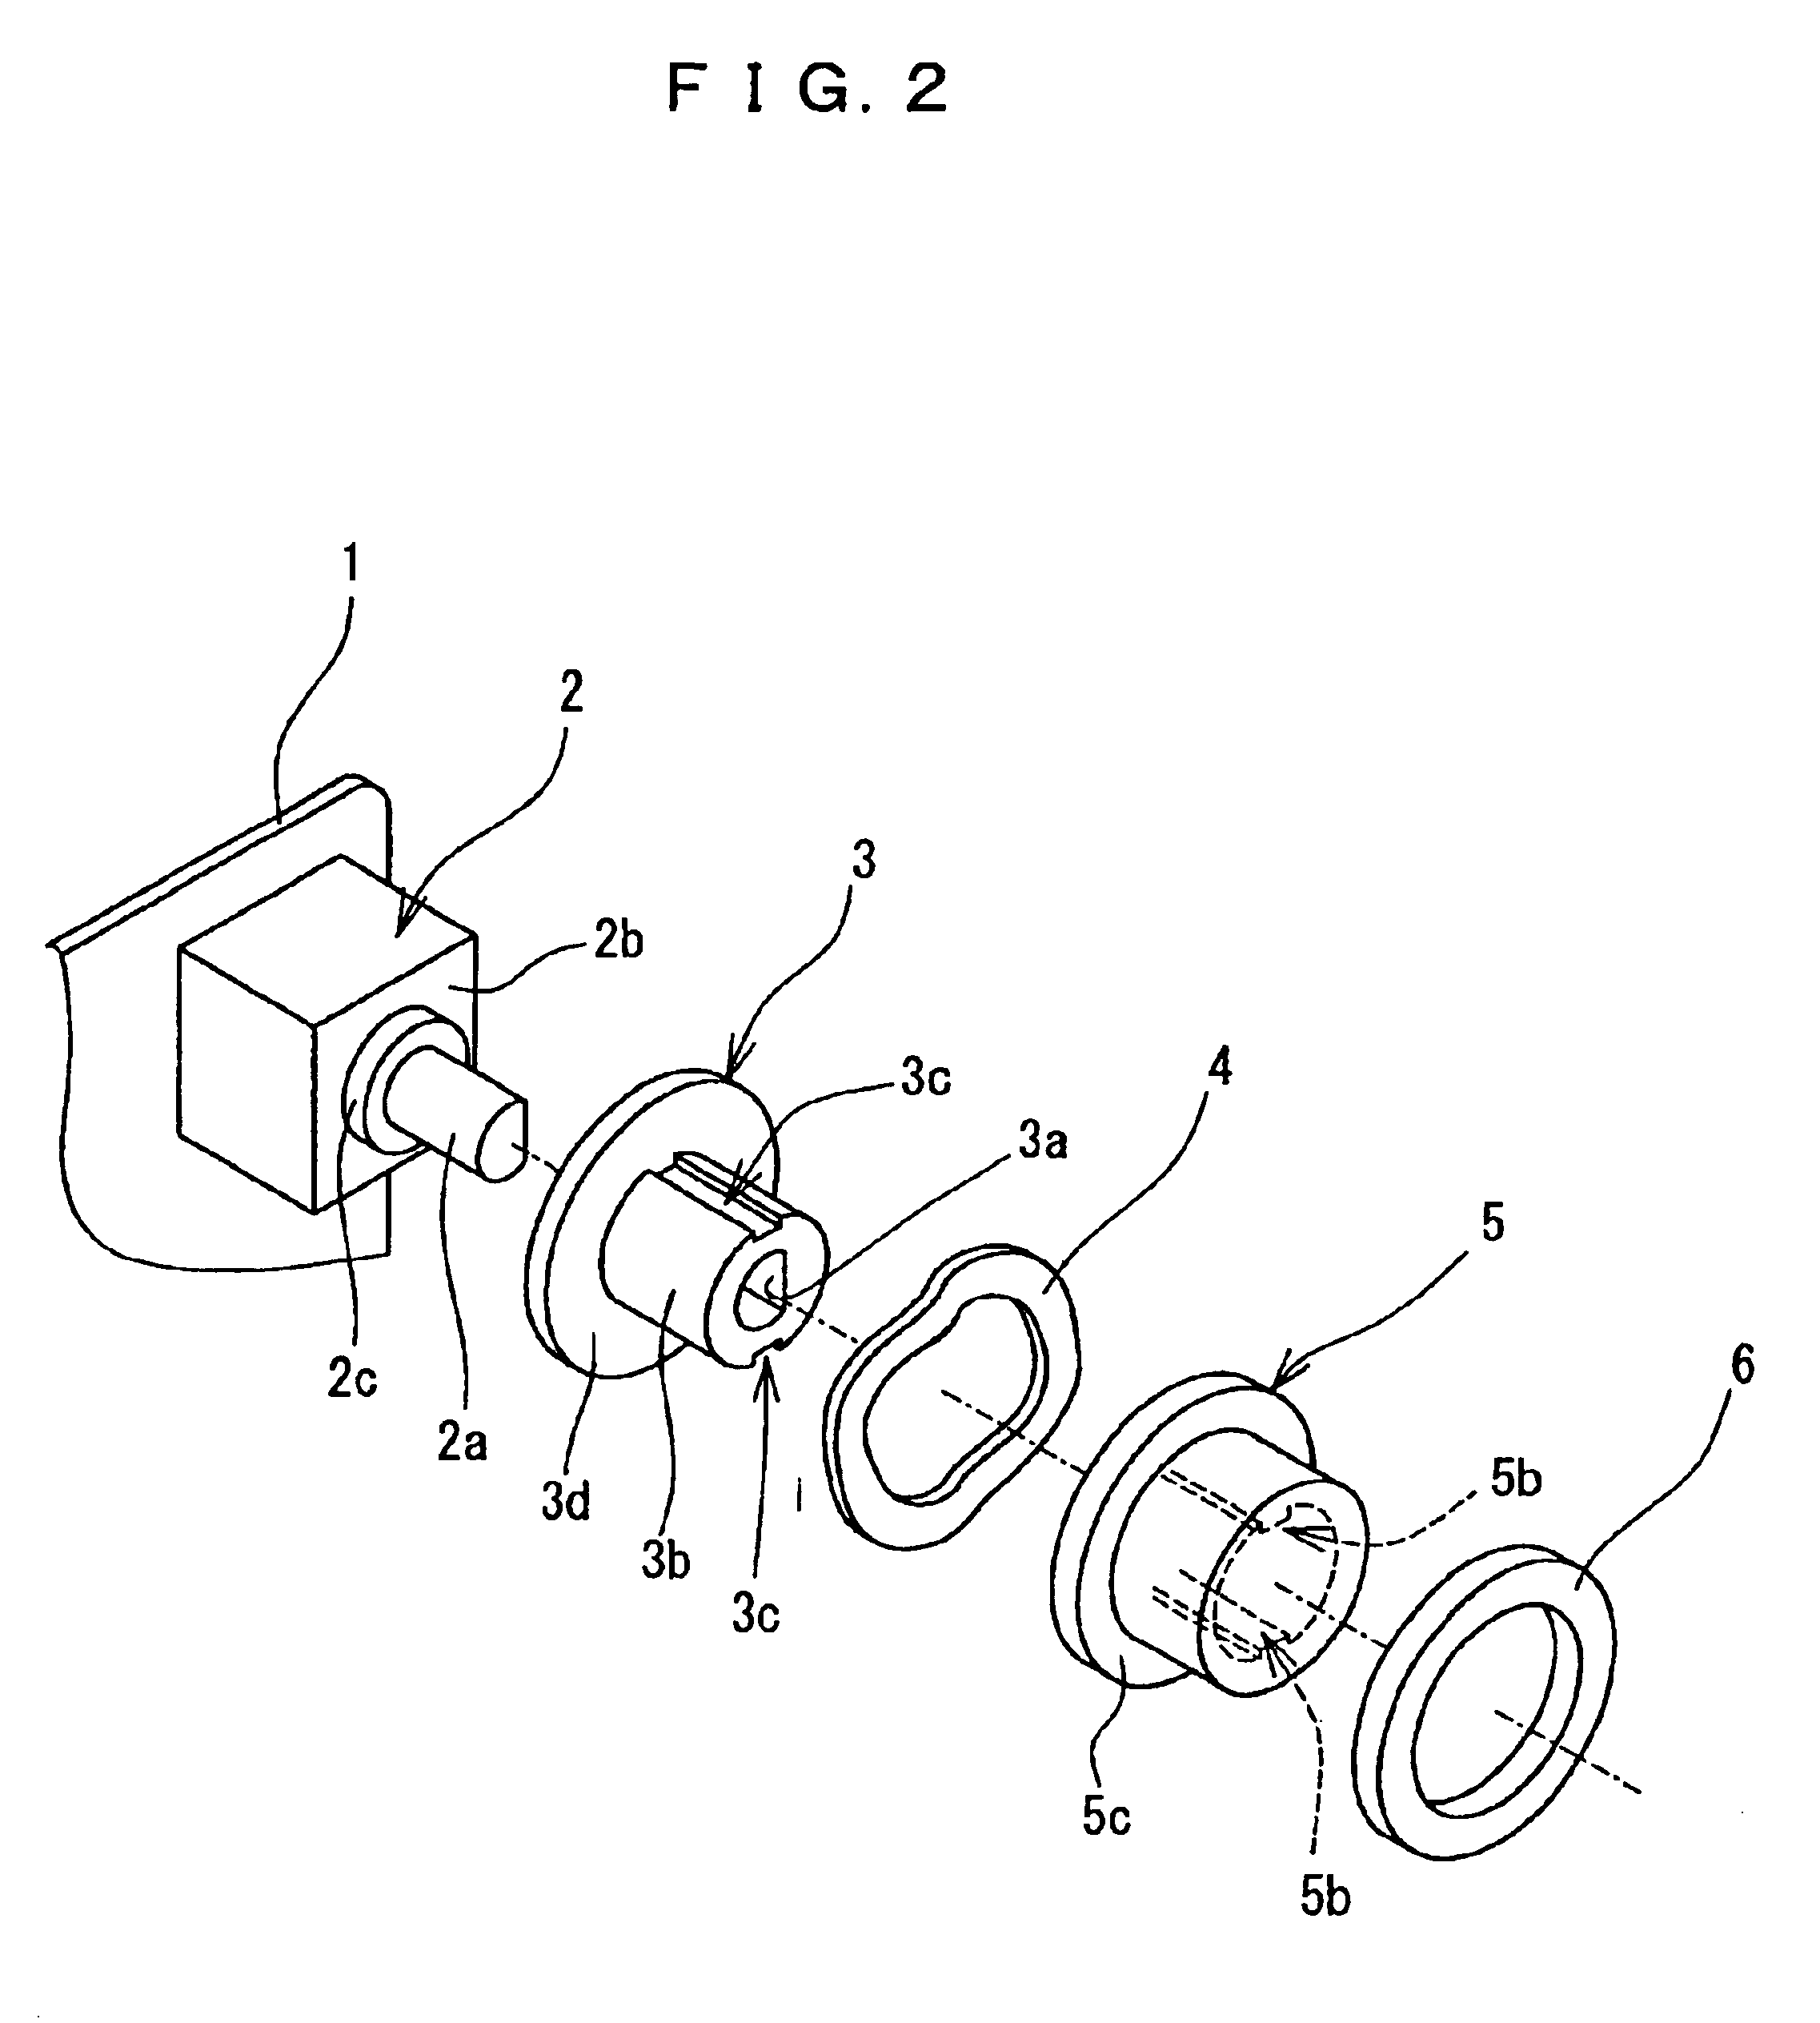 Anti-malfunction mechanism for variable output device